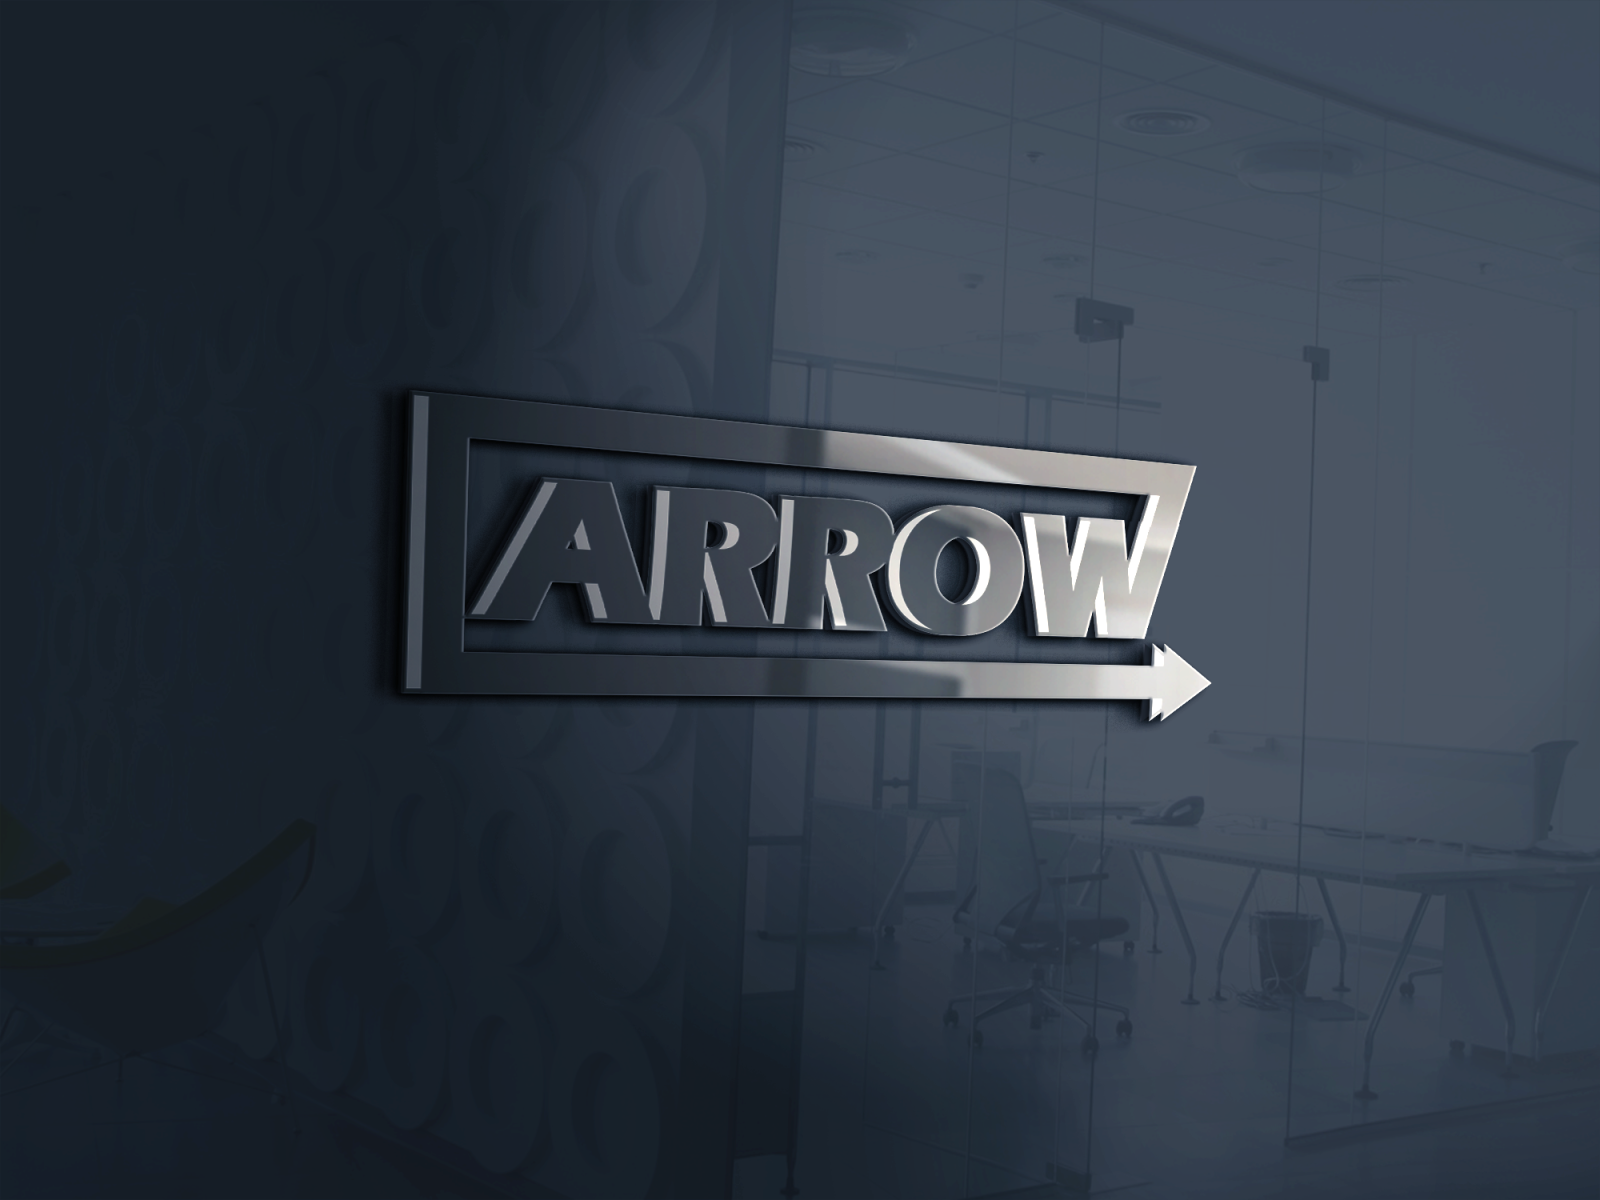 Download Arrow | 3D Glass Mockup by SoftSic on Dribbble